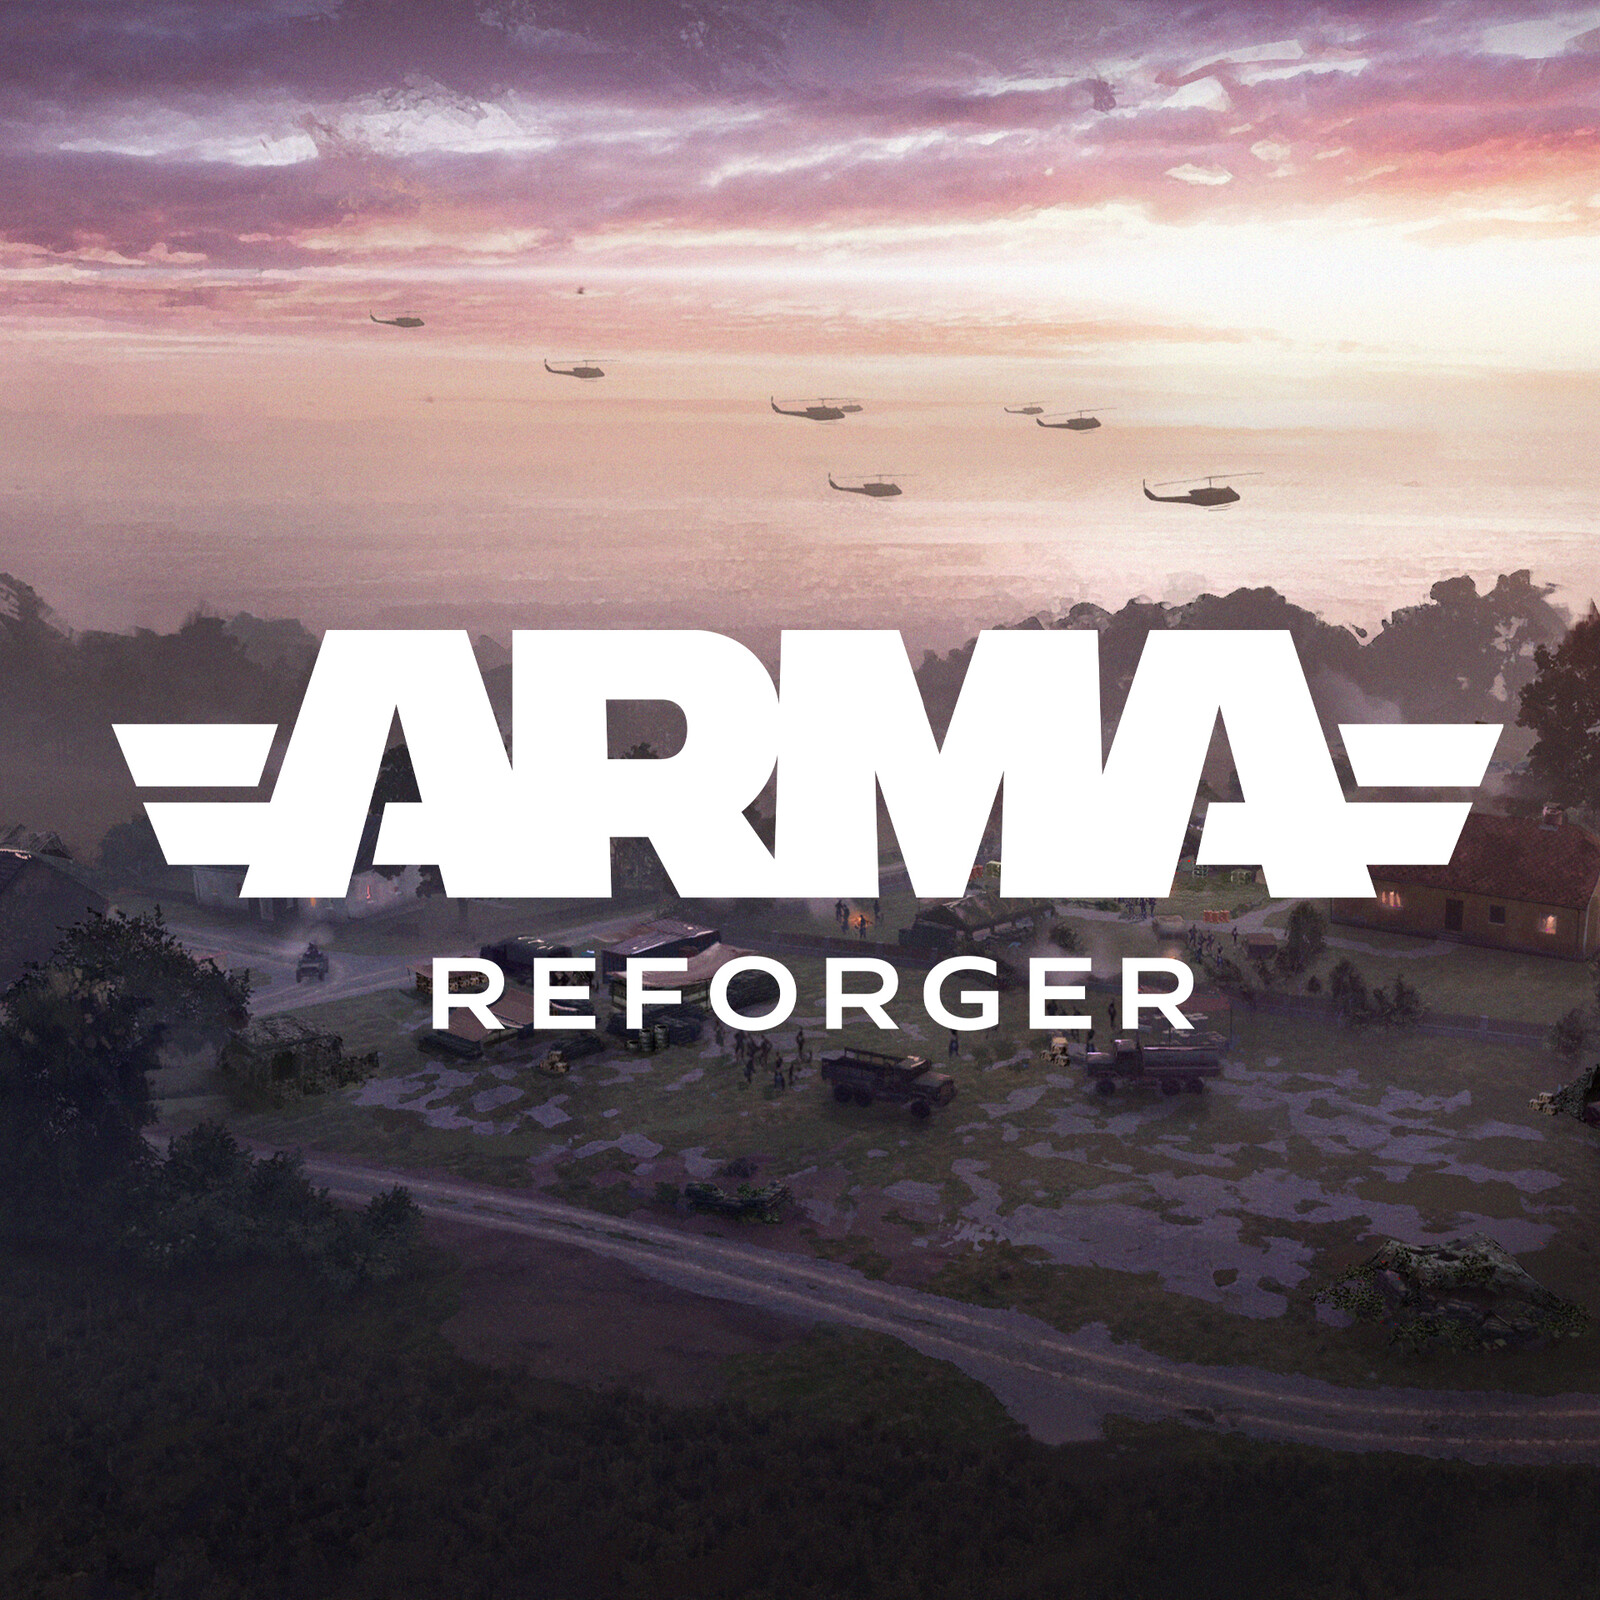 ARMA REFORGER - Outskirts view